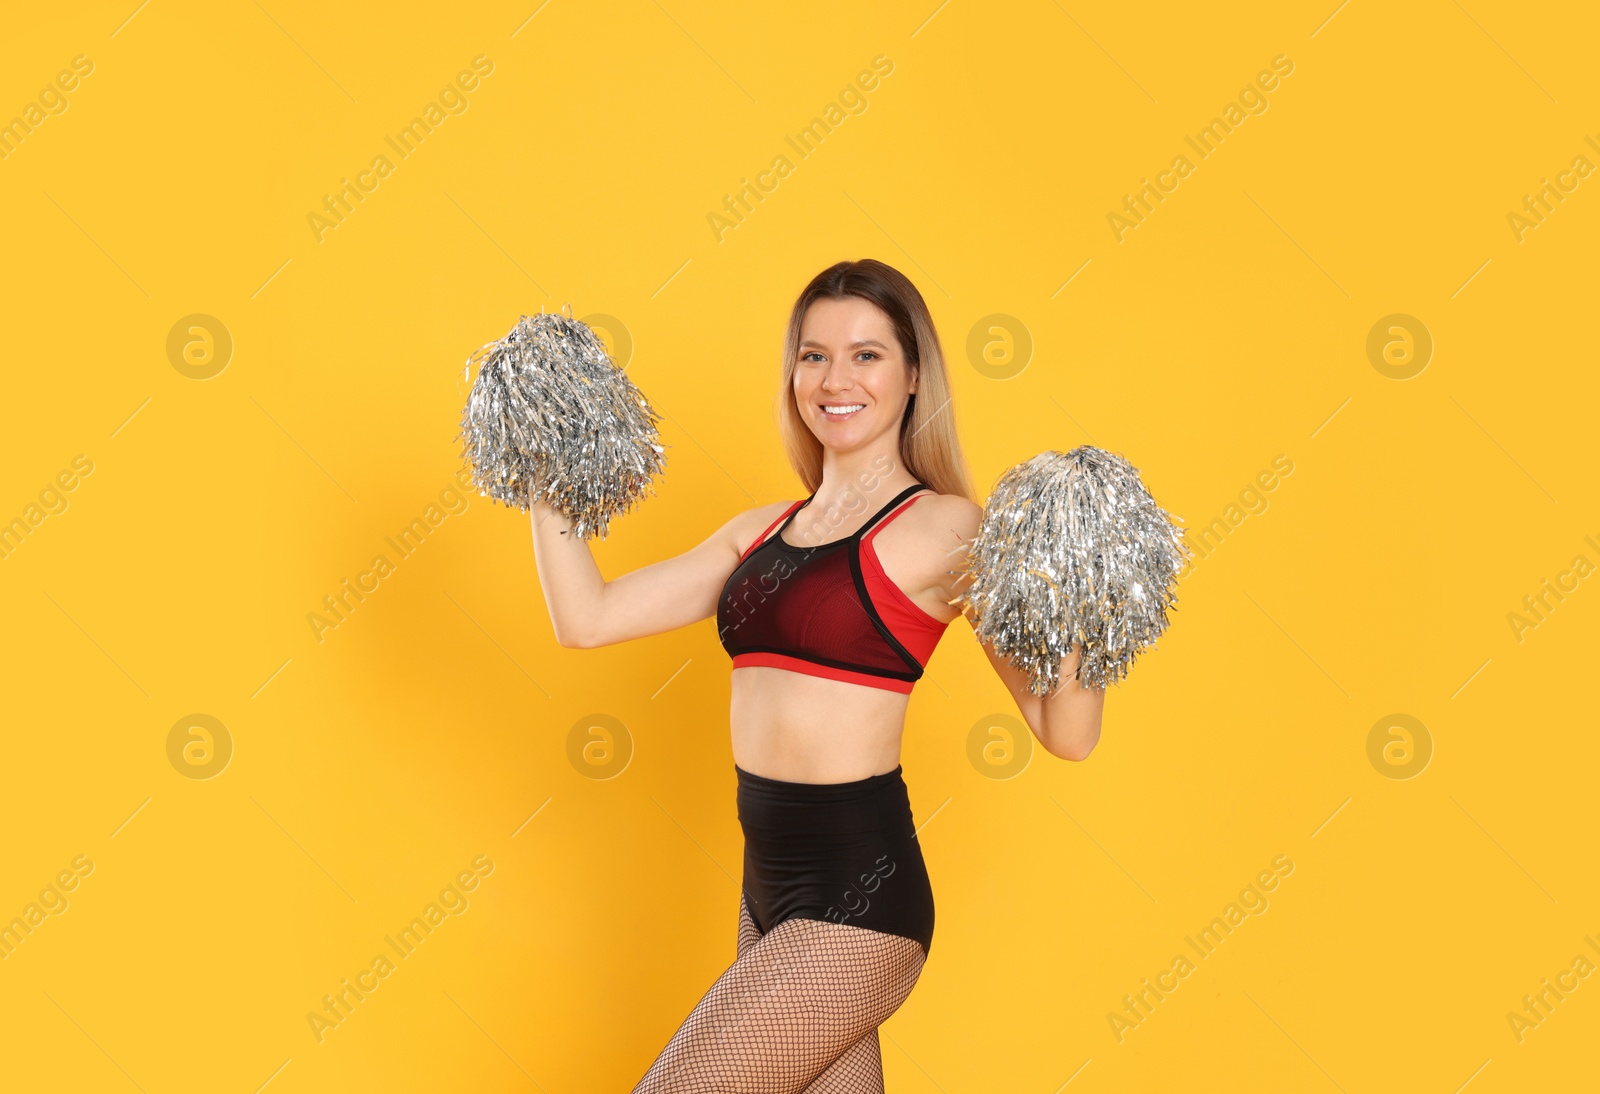 Photo of Beautiful cheerleader in costume holding pom poms on yellow background